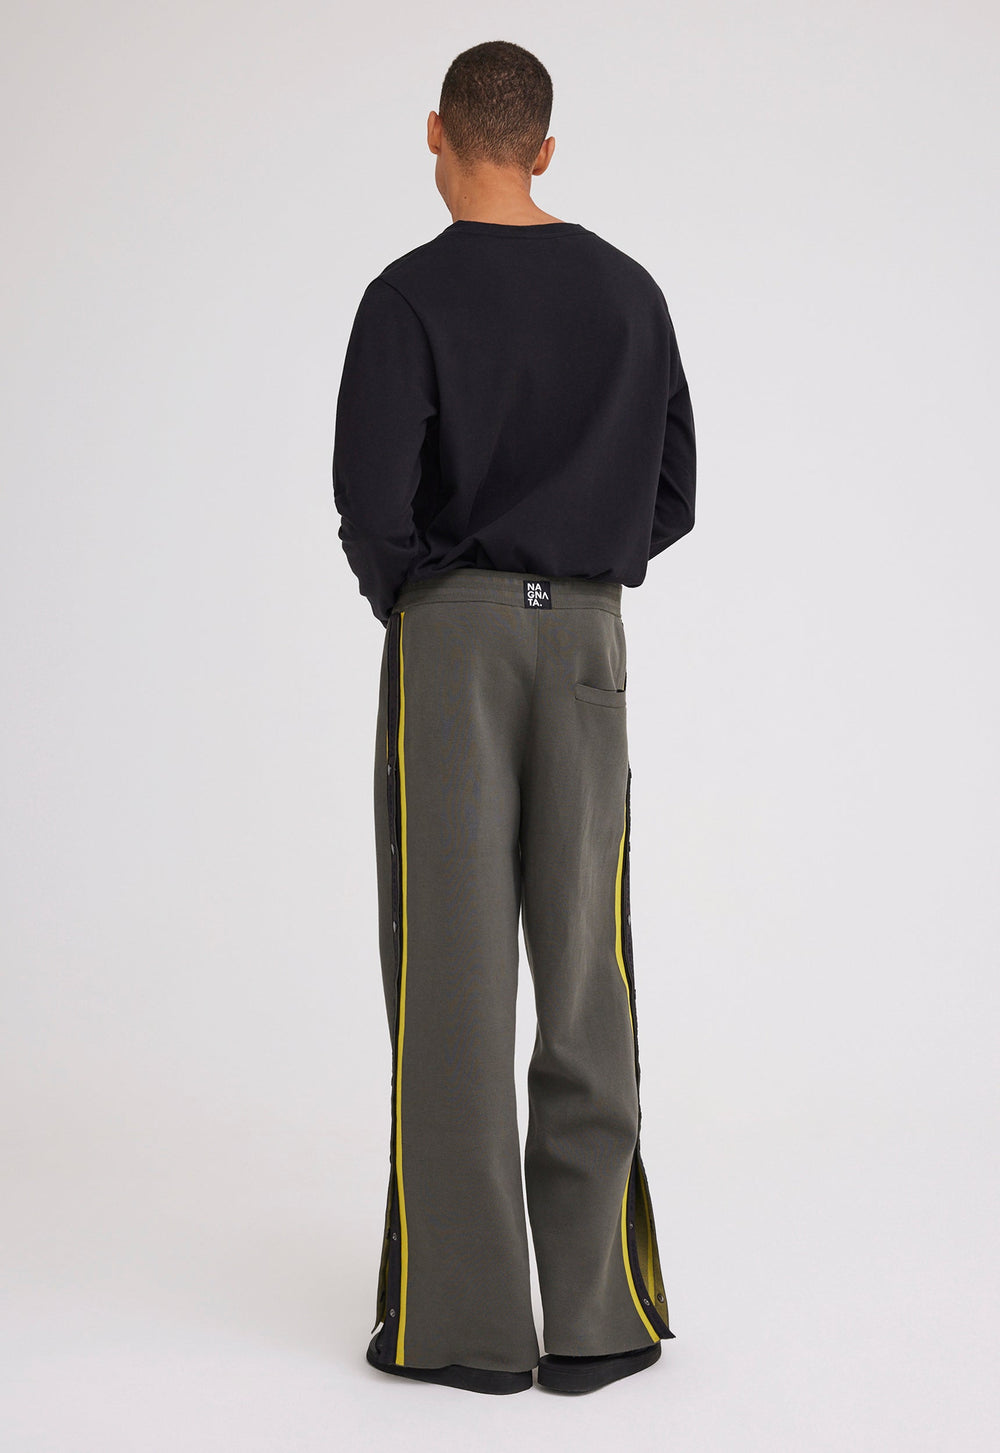 Jac+Jack NAGNATA SIDE SNAP TRACK PANT in Forest/Chartreuse